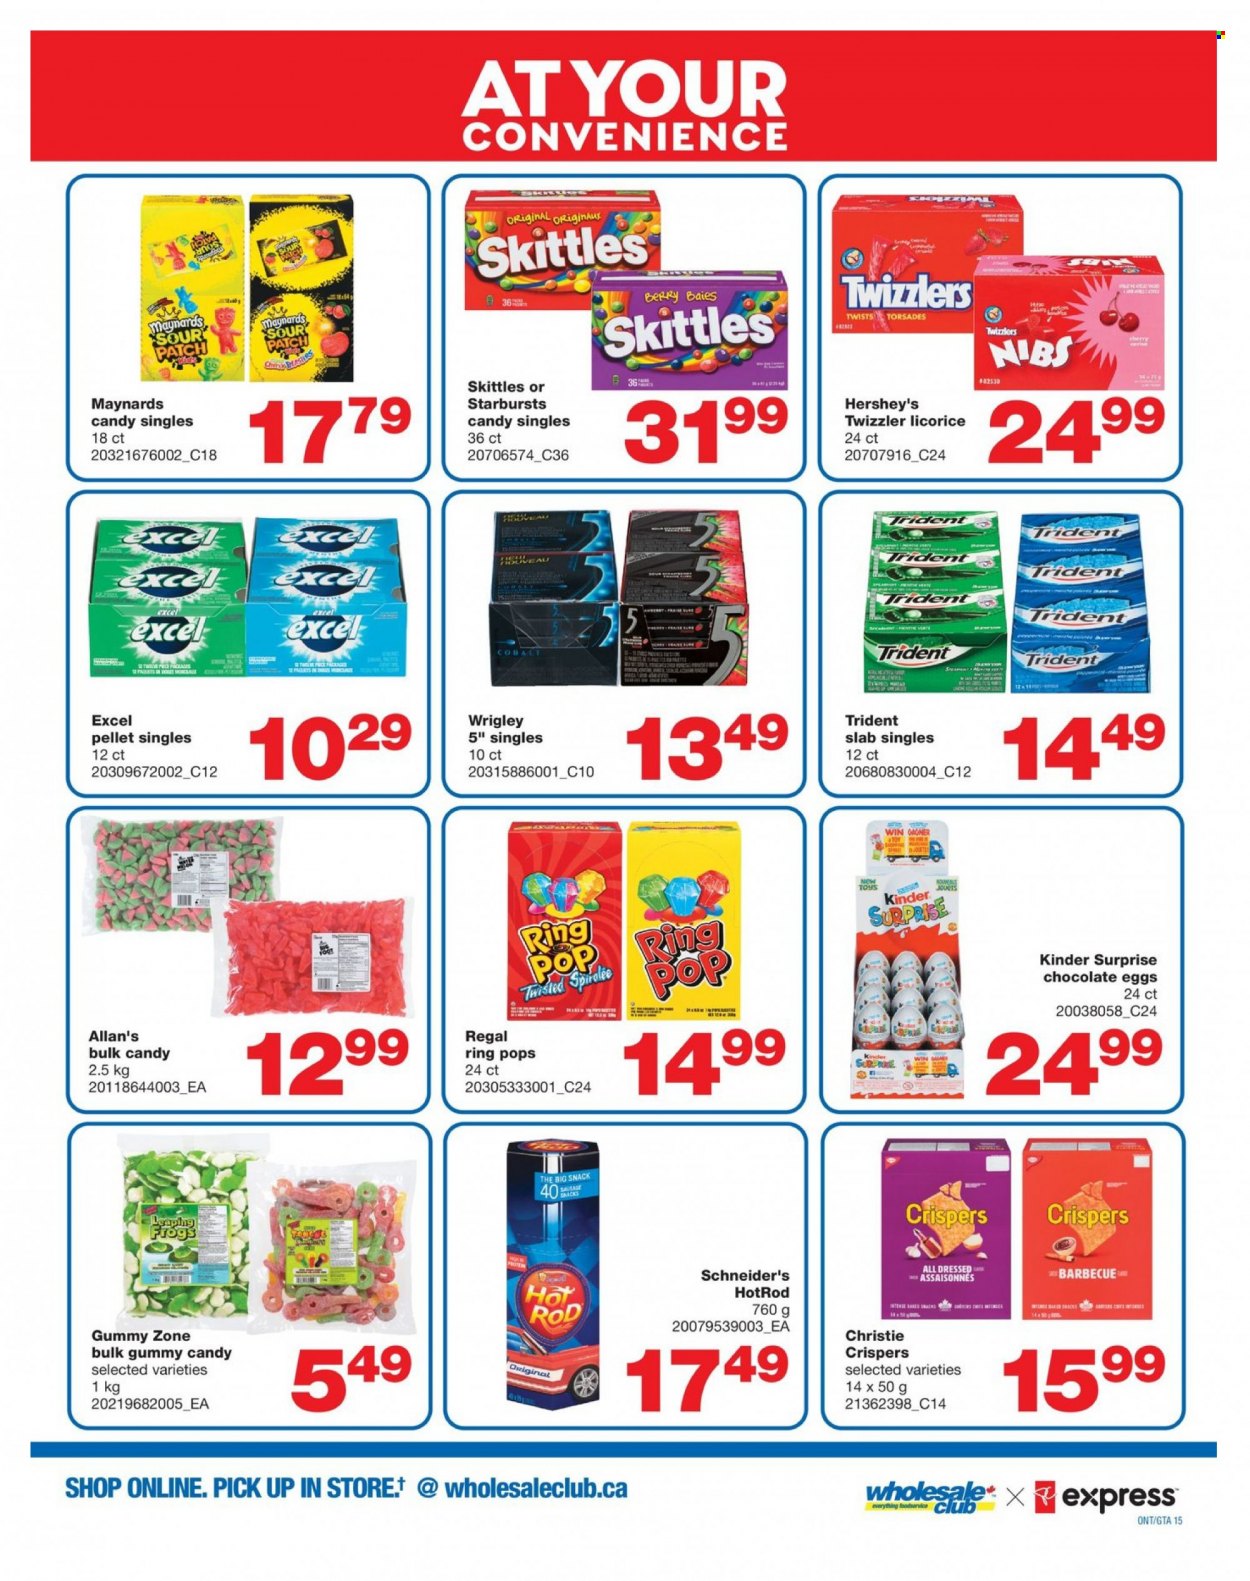 thumbnail - Wholesale Club Flyer - April 28, 2022 - May 18, 2022 - Sales products - cherries, sausage, Hershey's, chocolate, snack, Kinder Surprise, Skittles, Trident, chocolate egg, sour patch. Page 15.